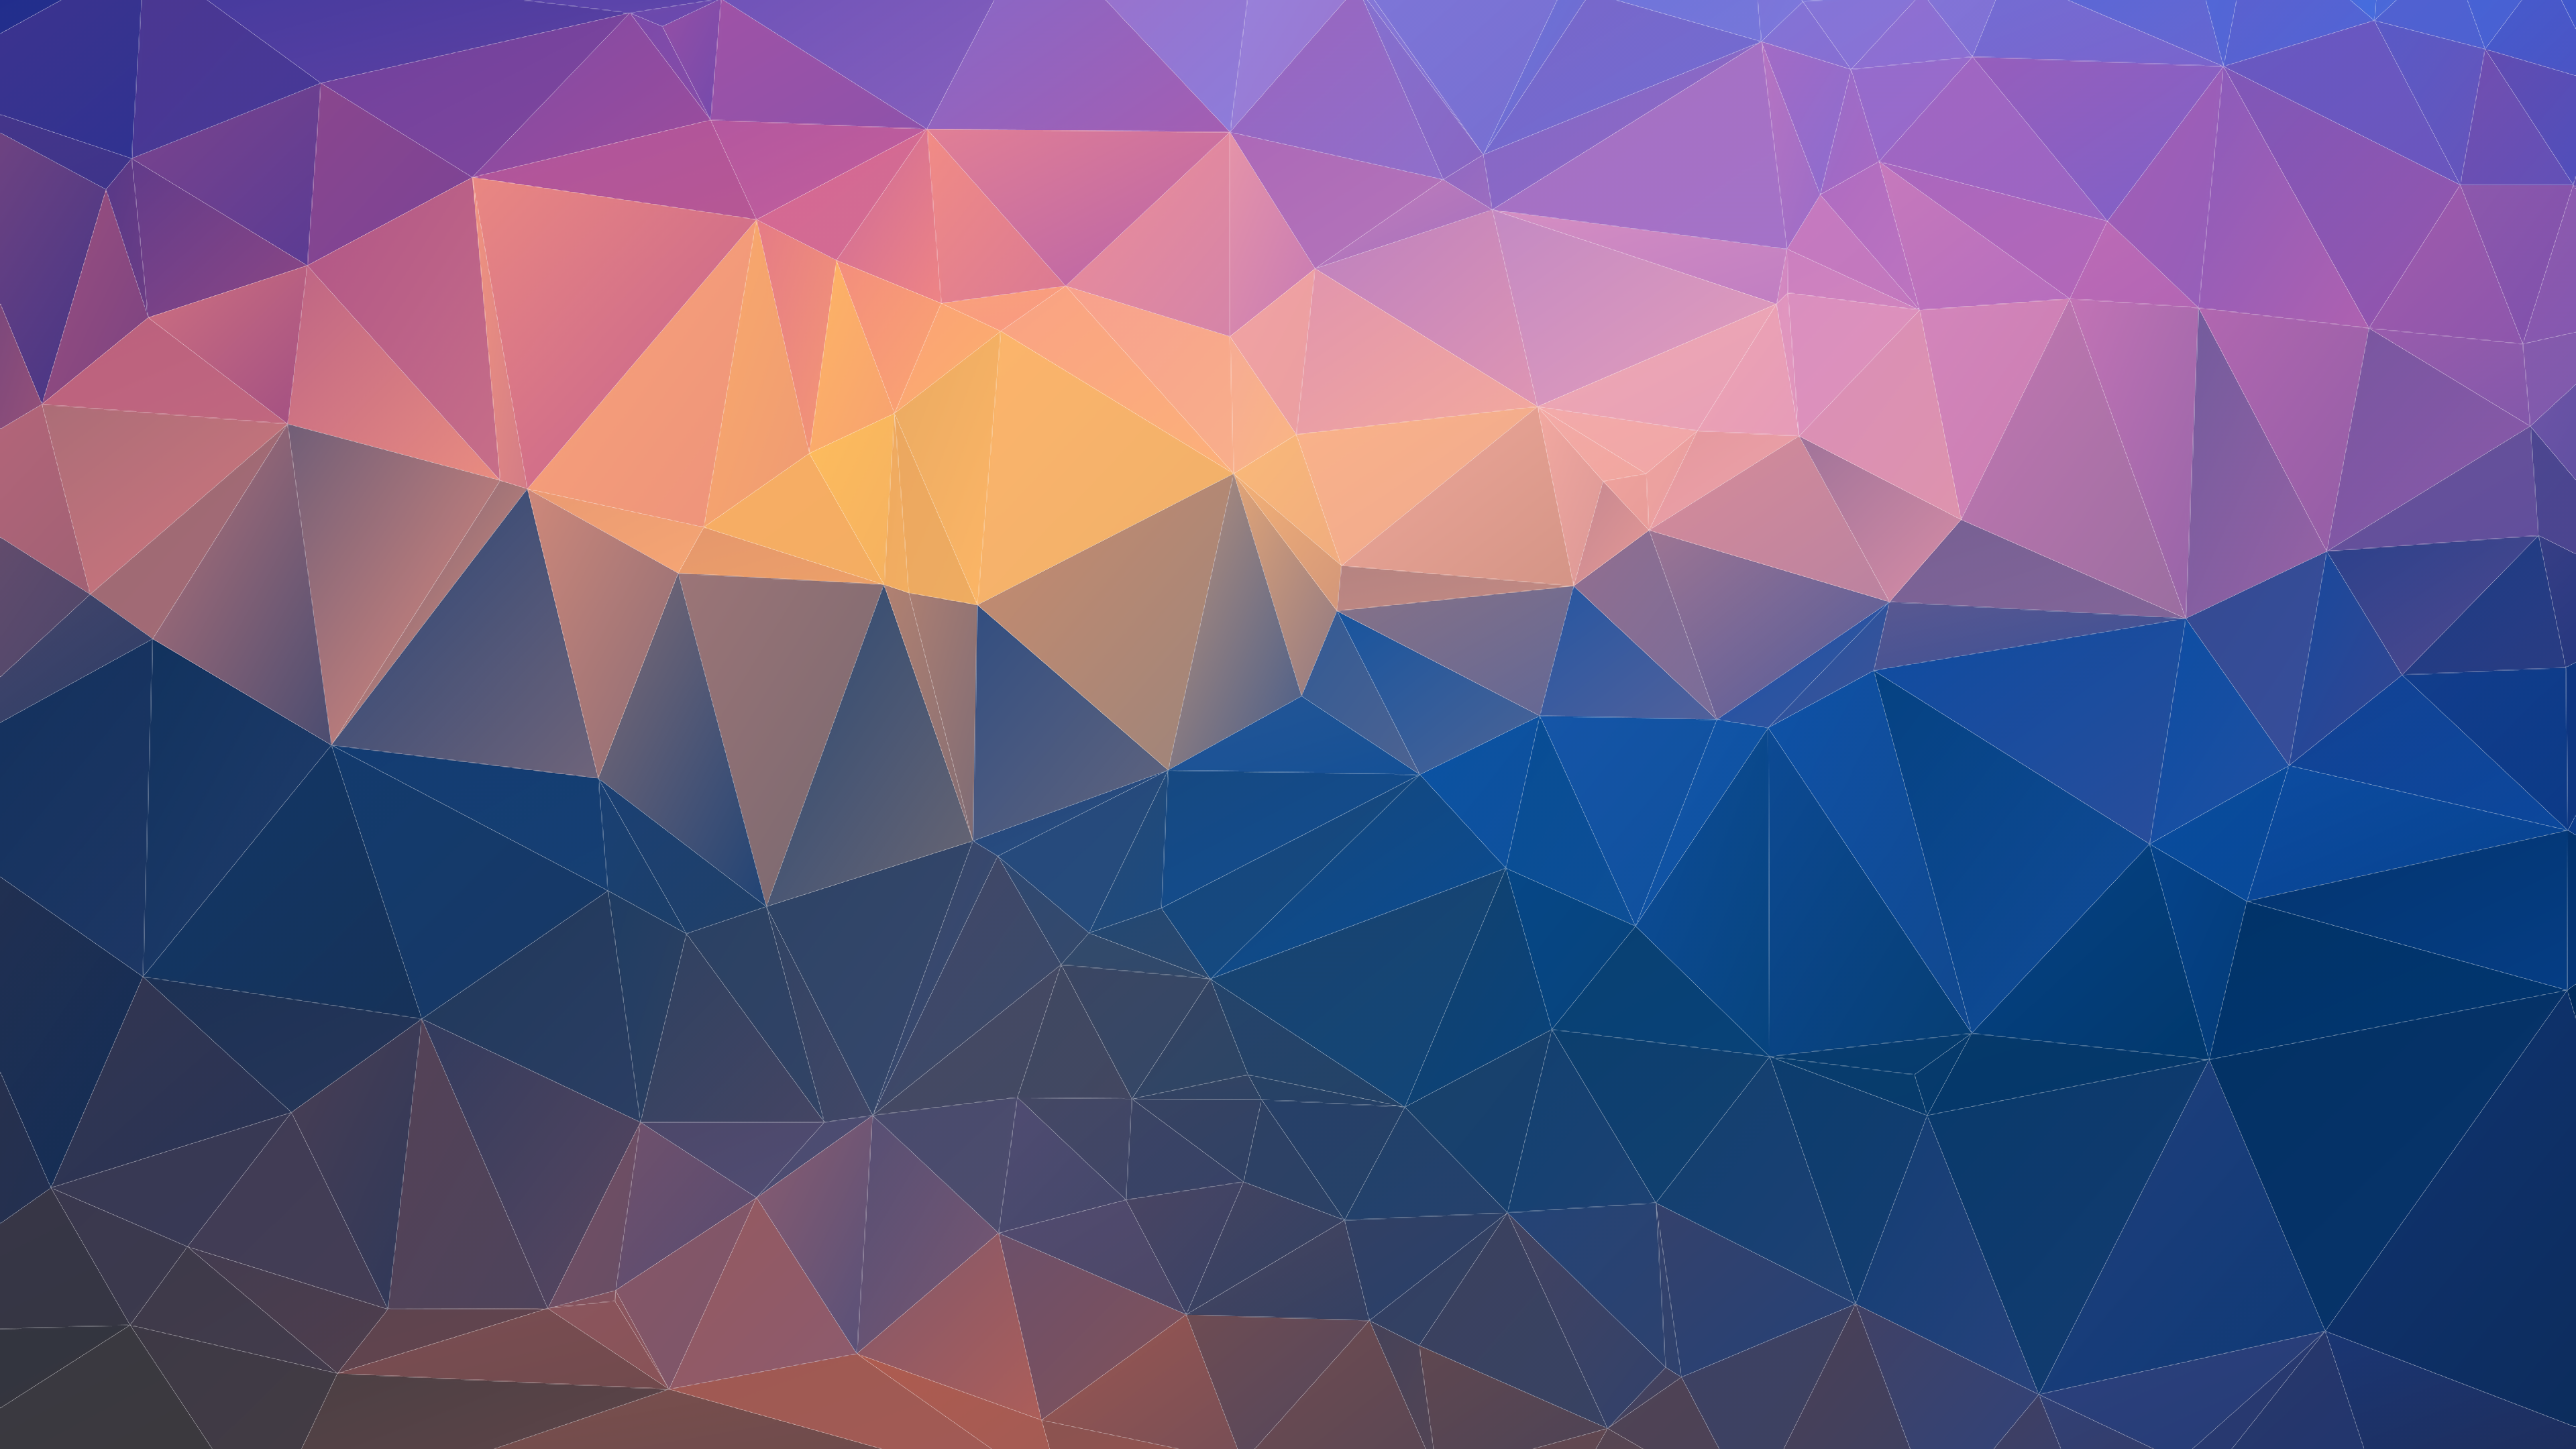 Download 3840x2160 Low Poly Triangles, Gradient, Warm Colors